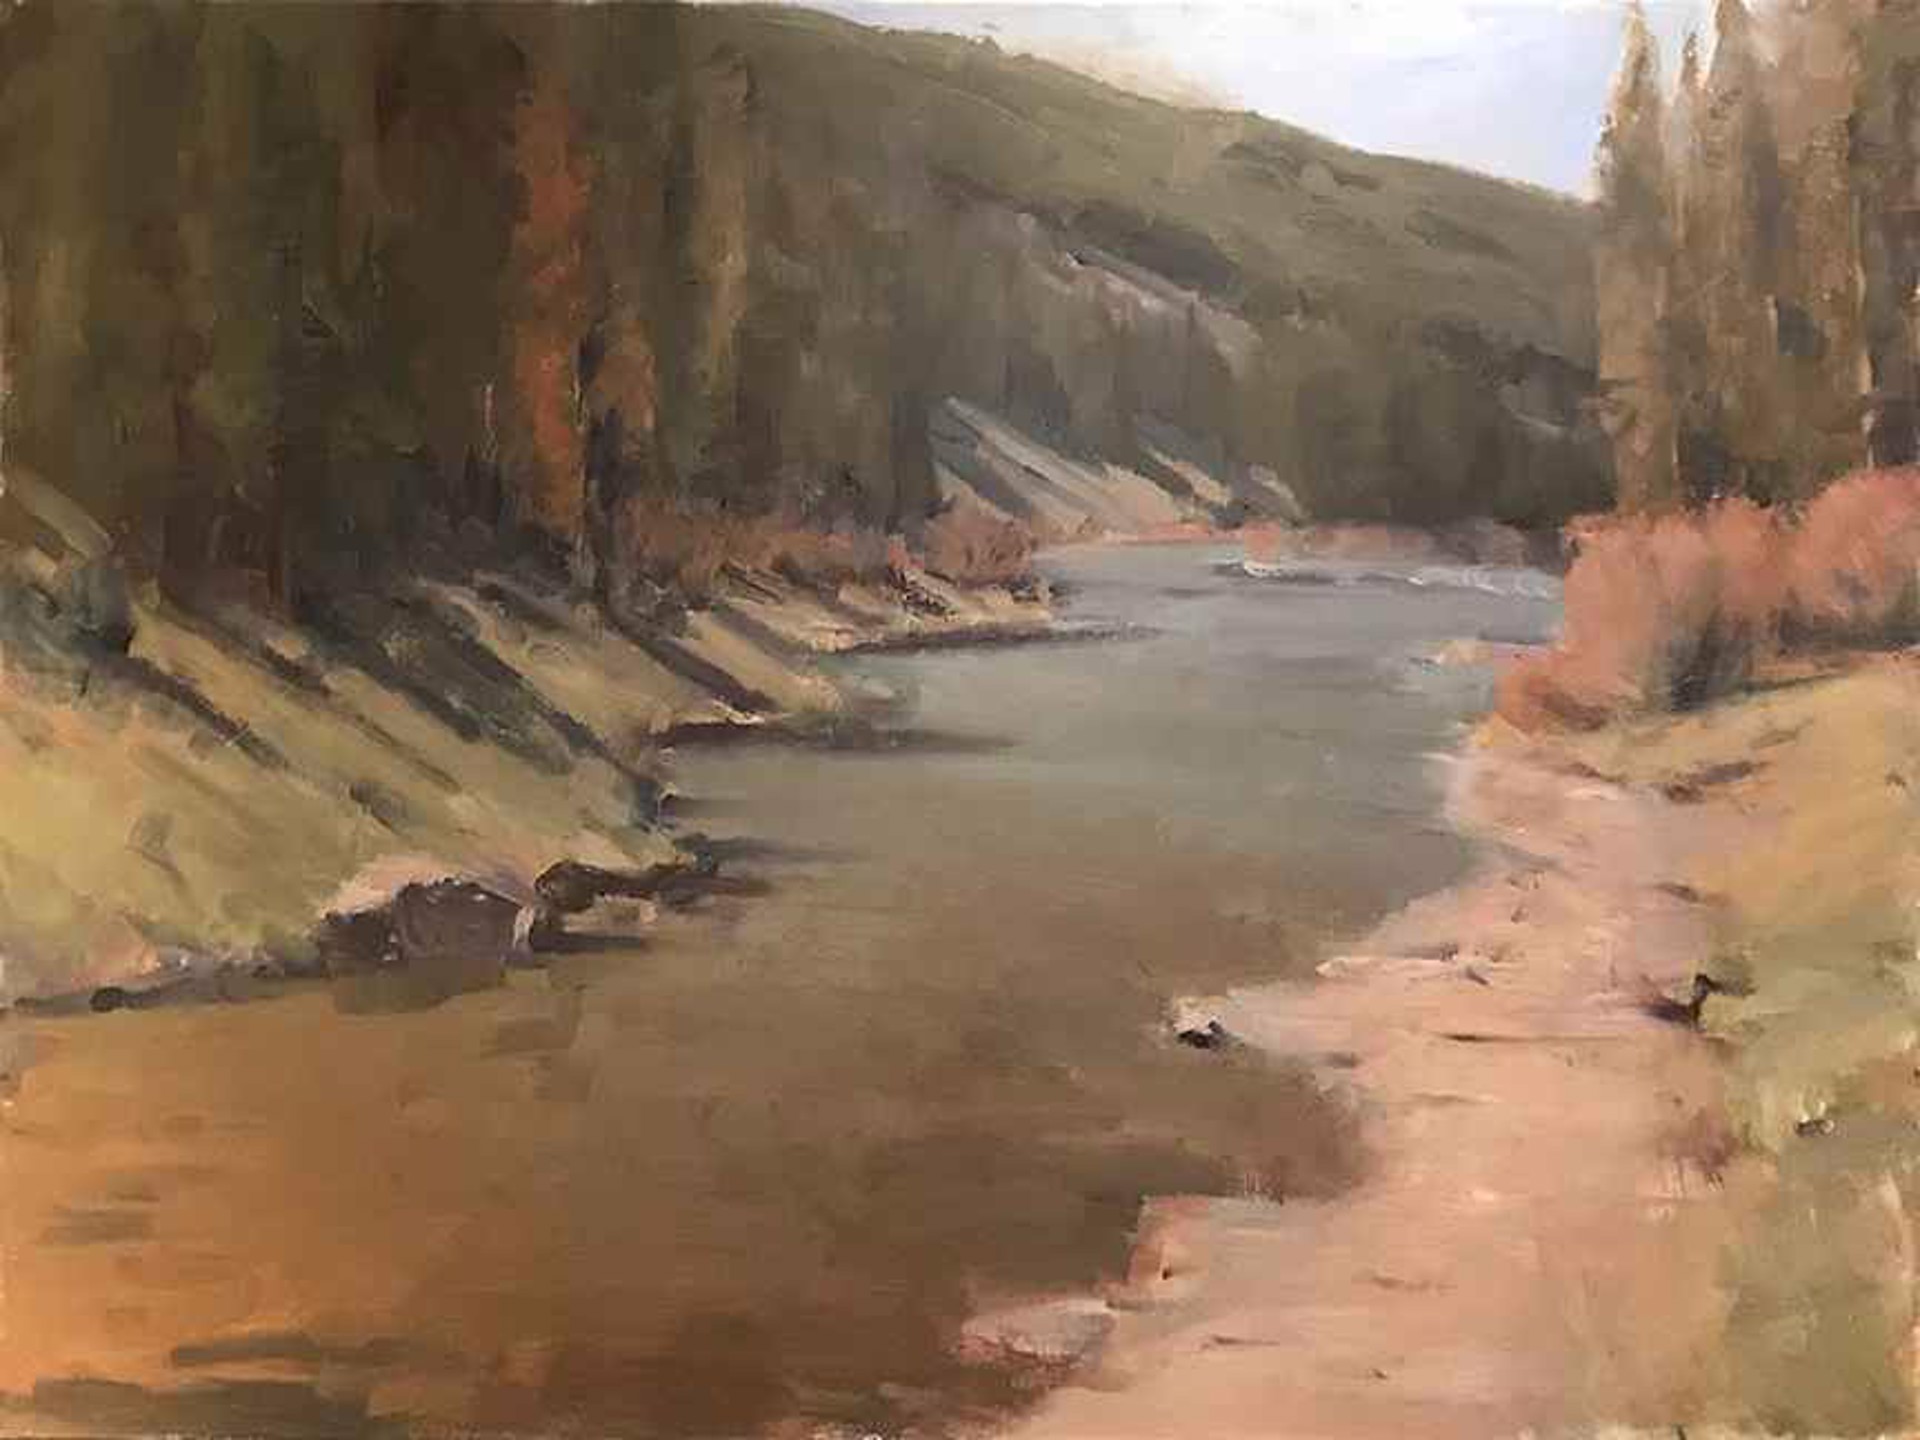 Untitled (View of Pine Creek) by Rick Howell